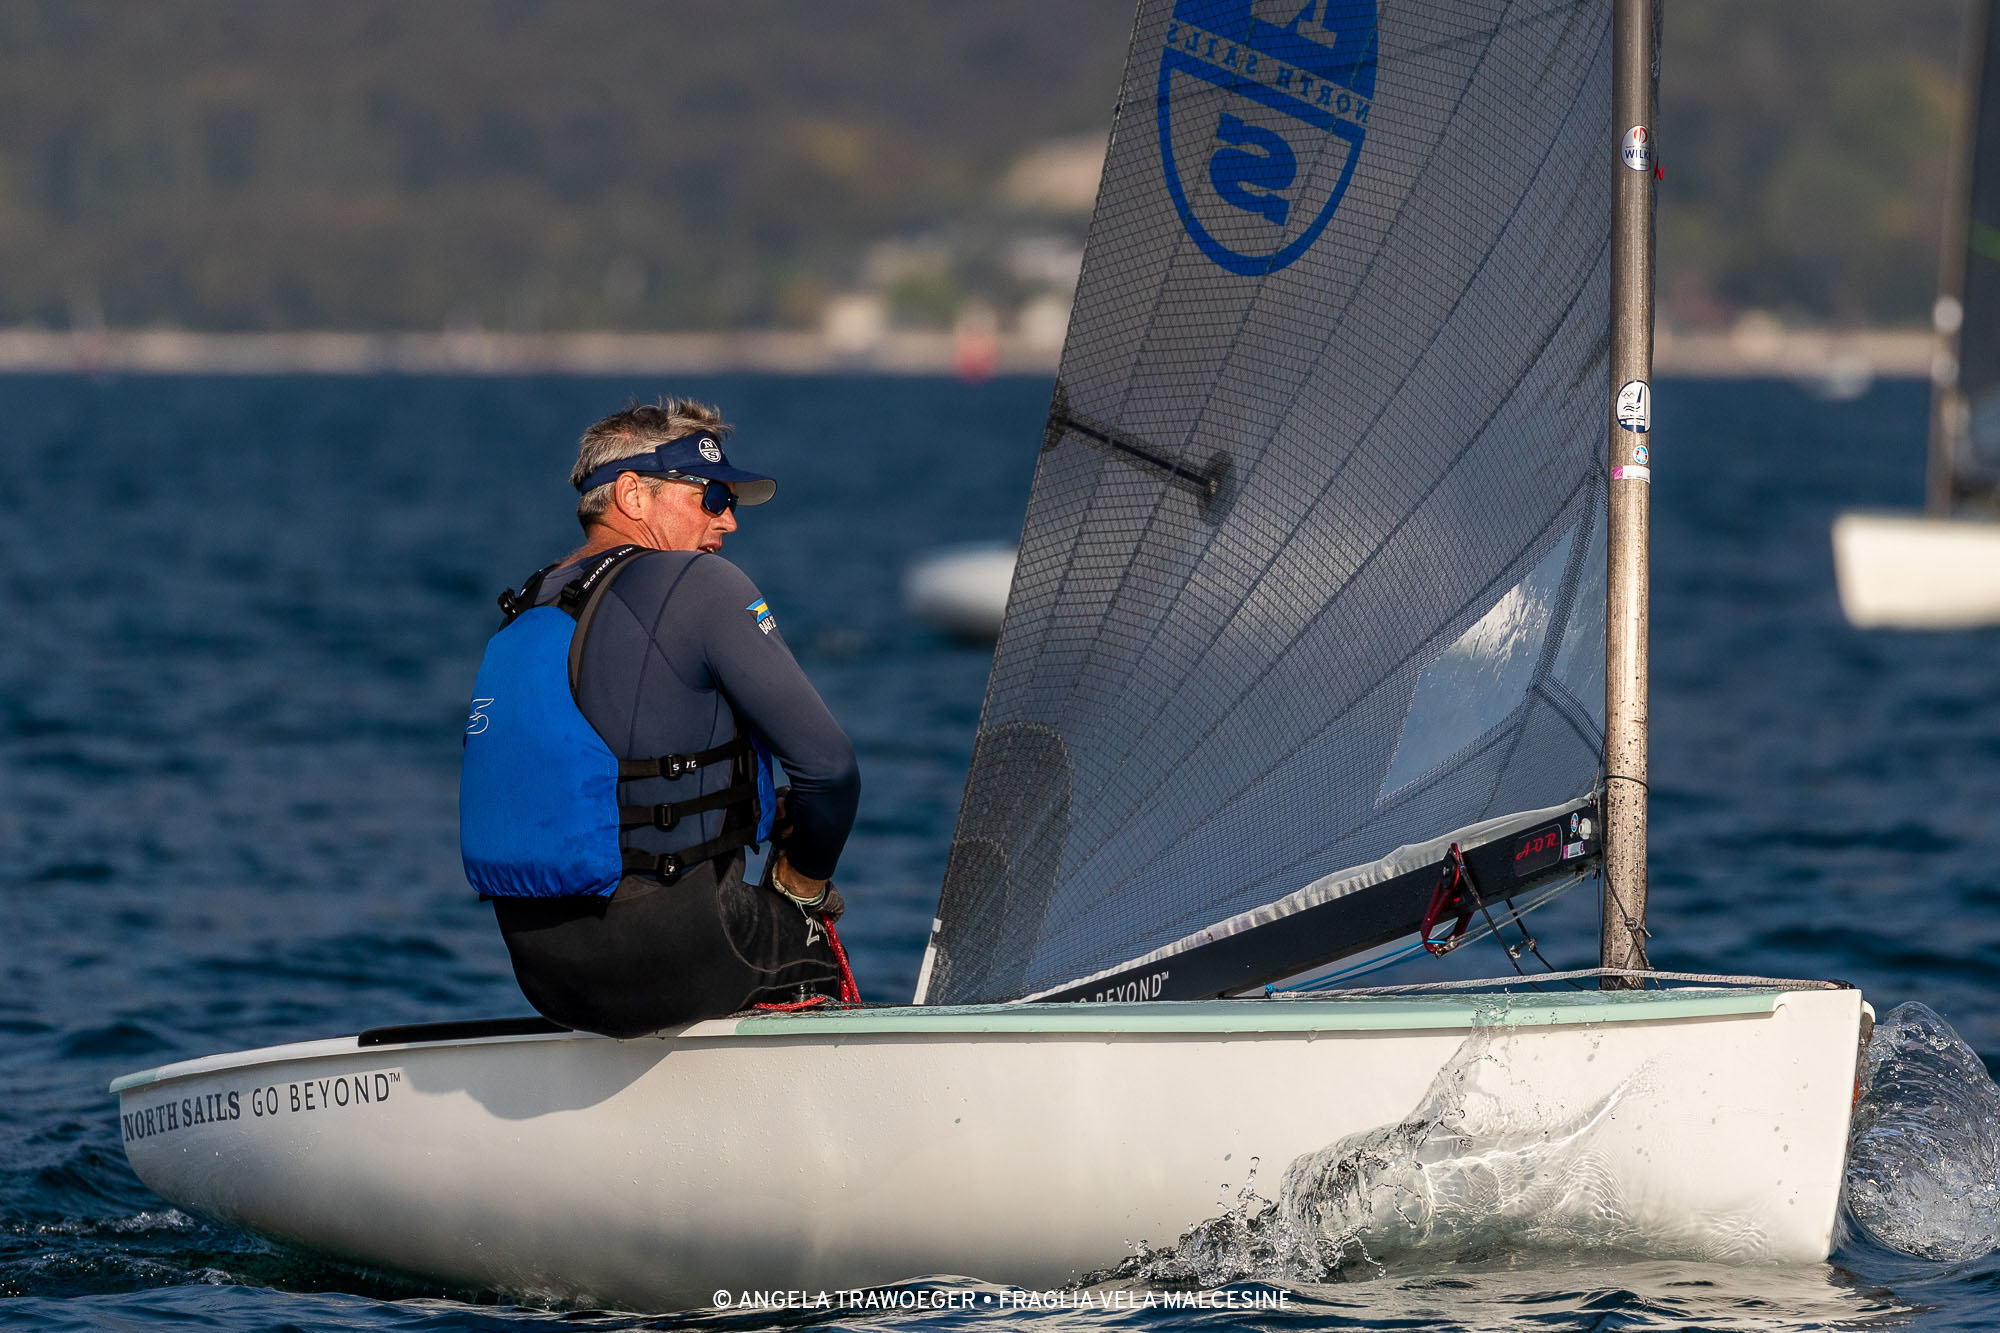  Finn  International Cup  Malcesine ITA  Final results  Victoire pour Christoph Burger SUI